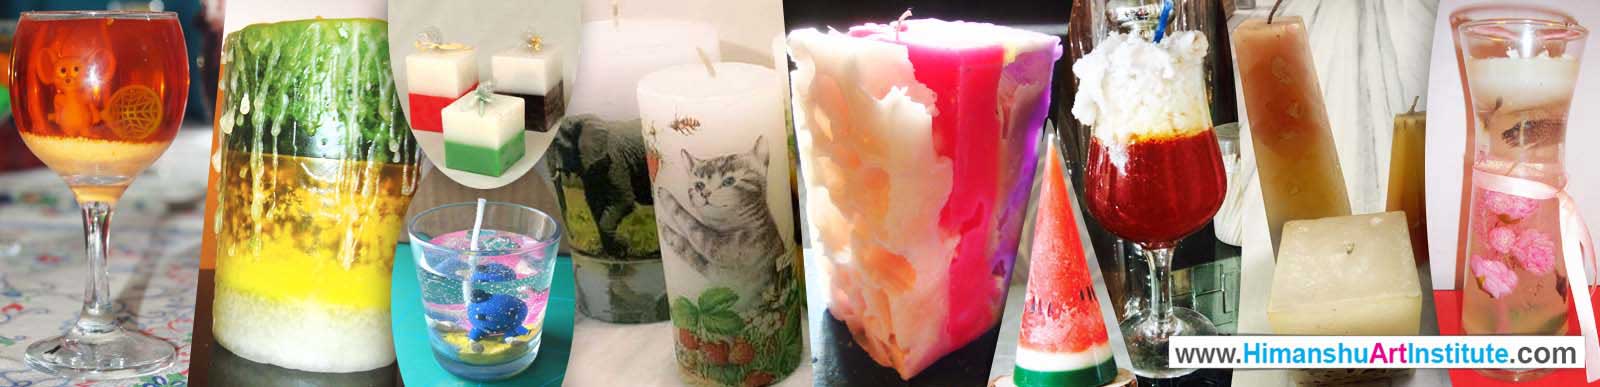 Certificate Hobby Course in Candle Making Classes, Art & Craft Institute in Delhi, India